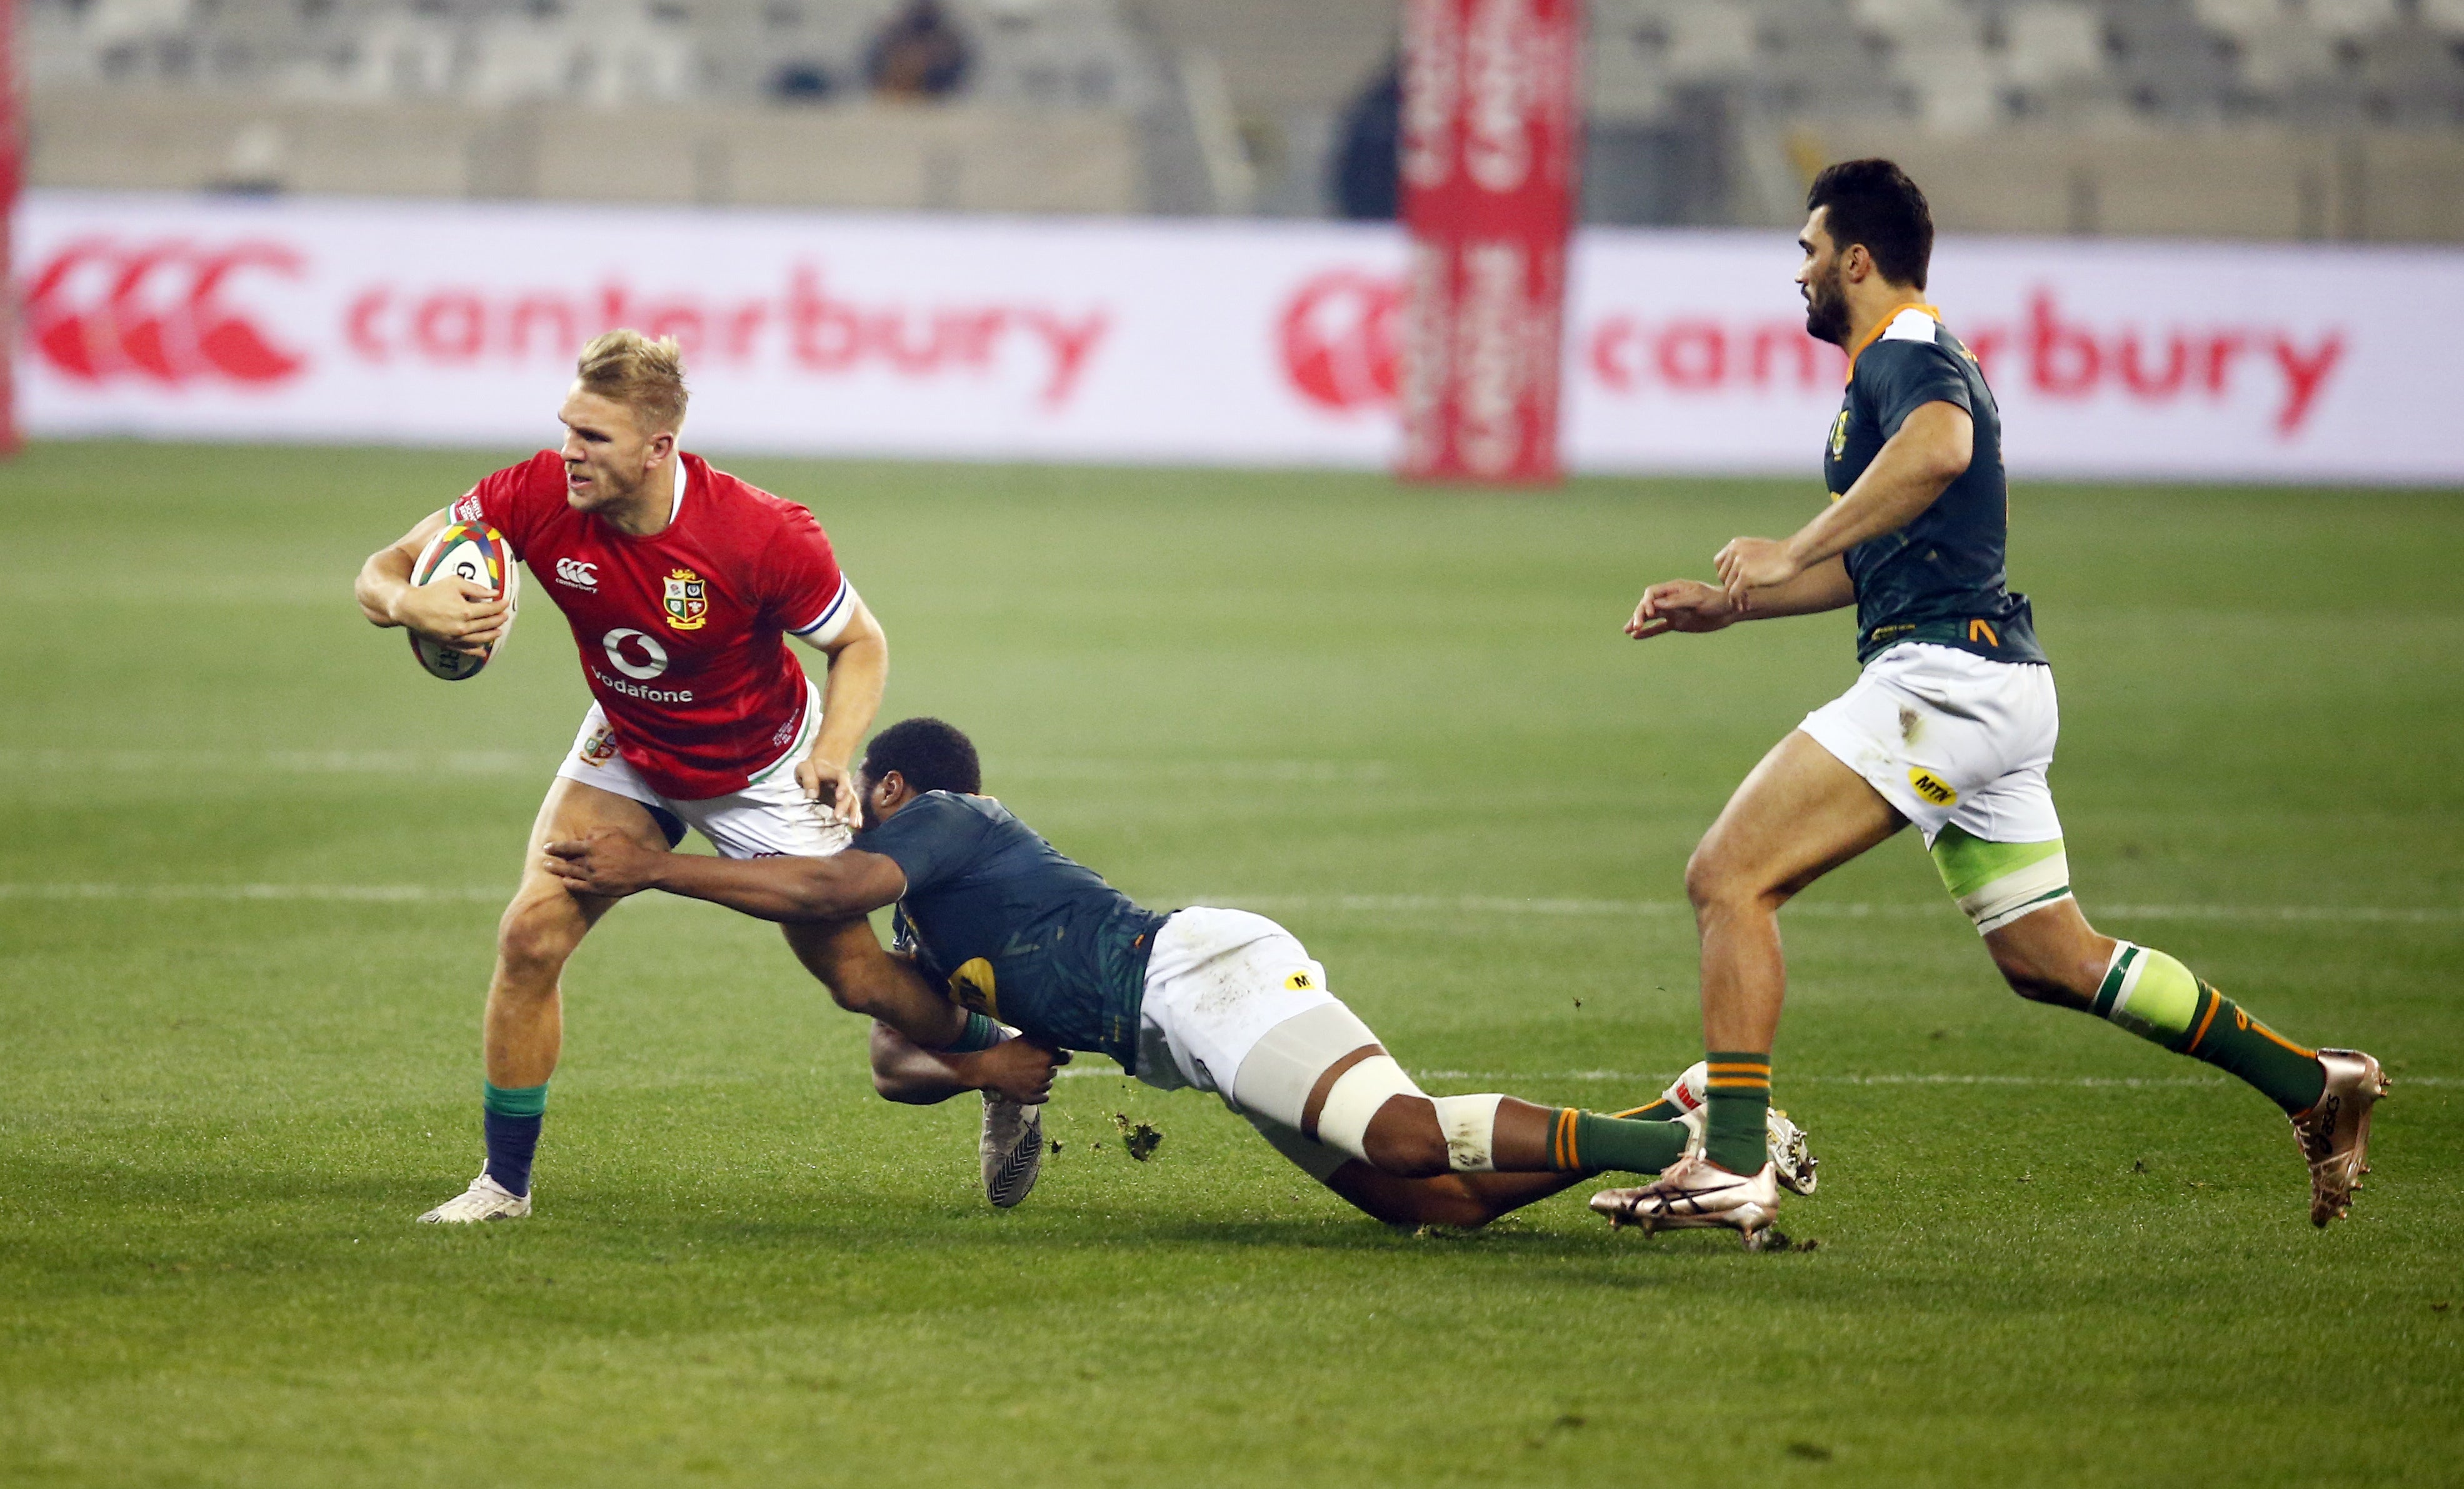 Chris Harris was a part of the Lions’ South Africa tour